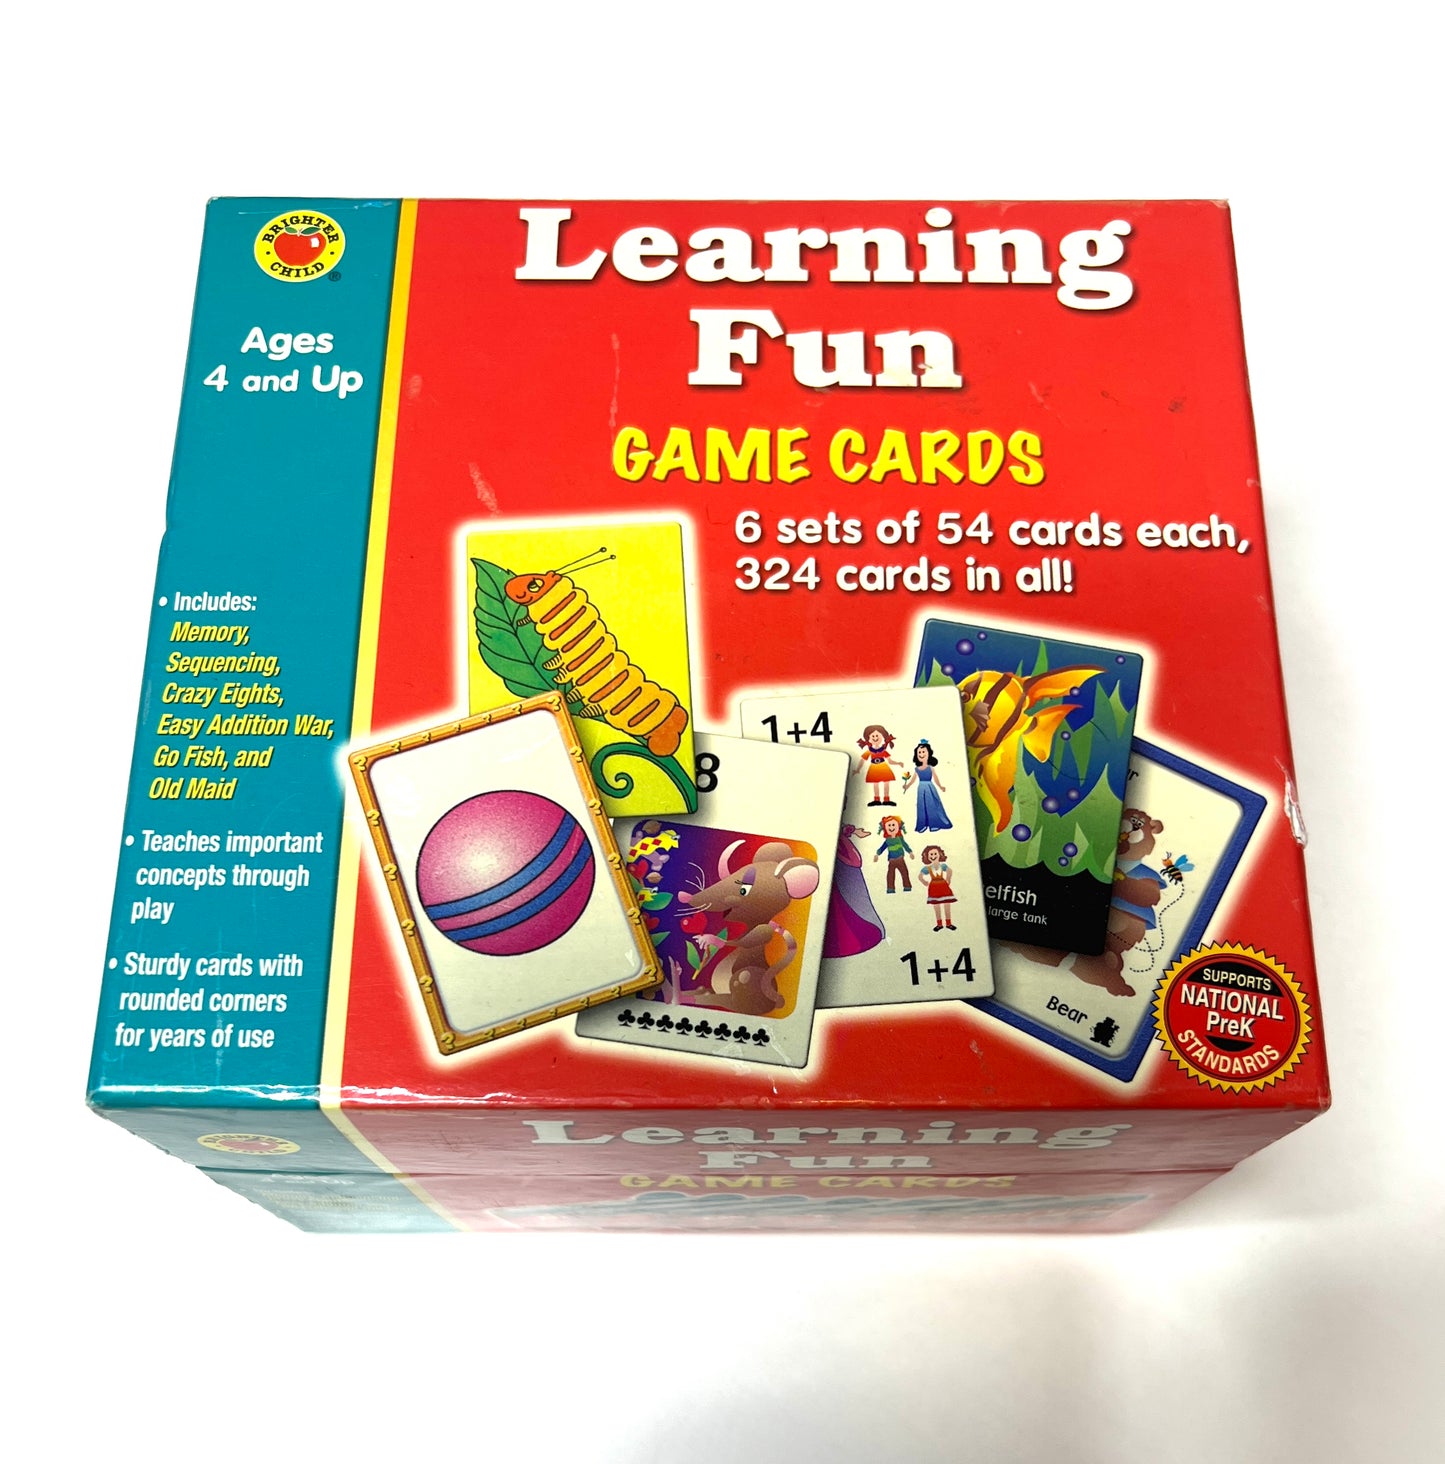 Learning Fun Card Set - 6 sets of learning cards/games